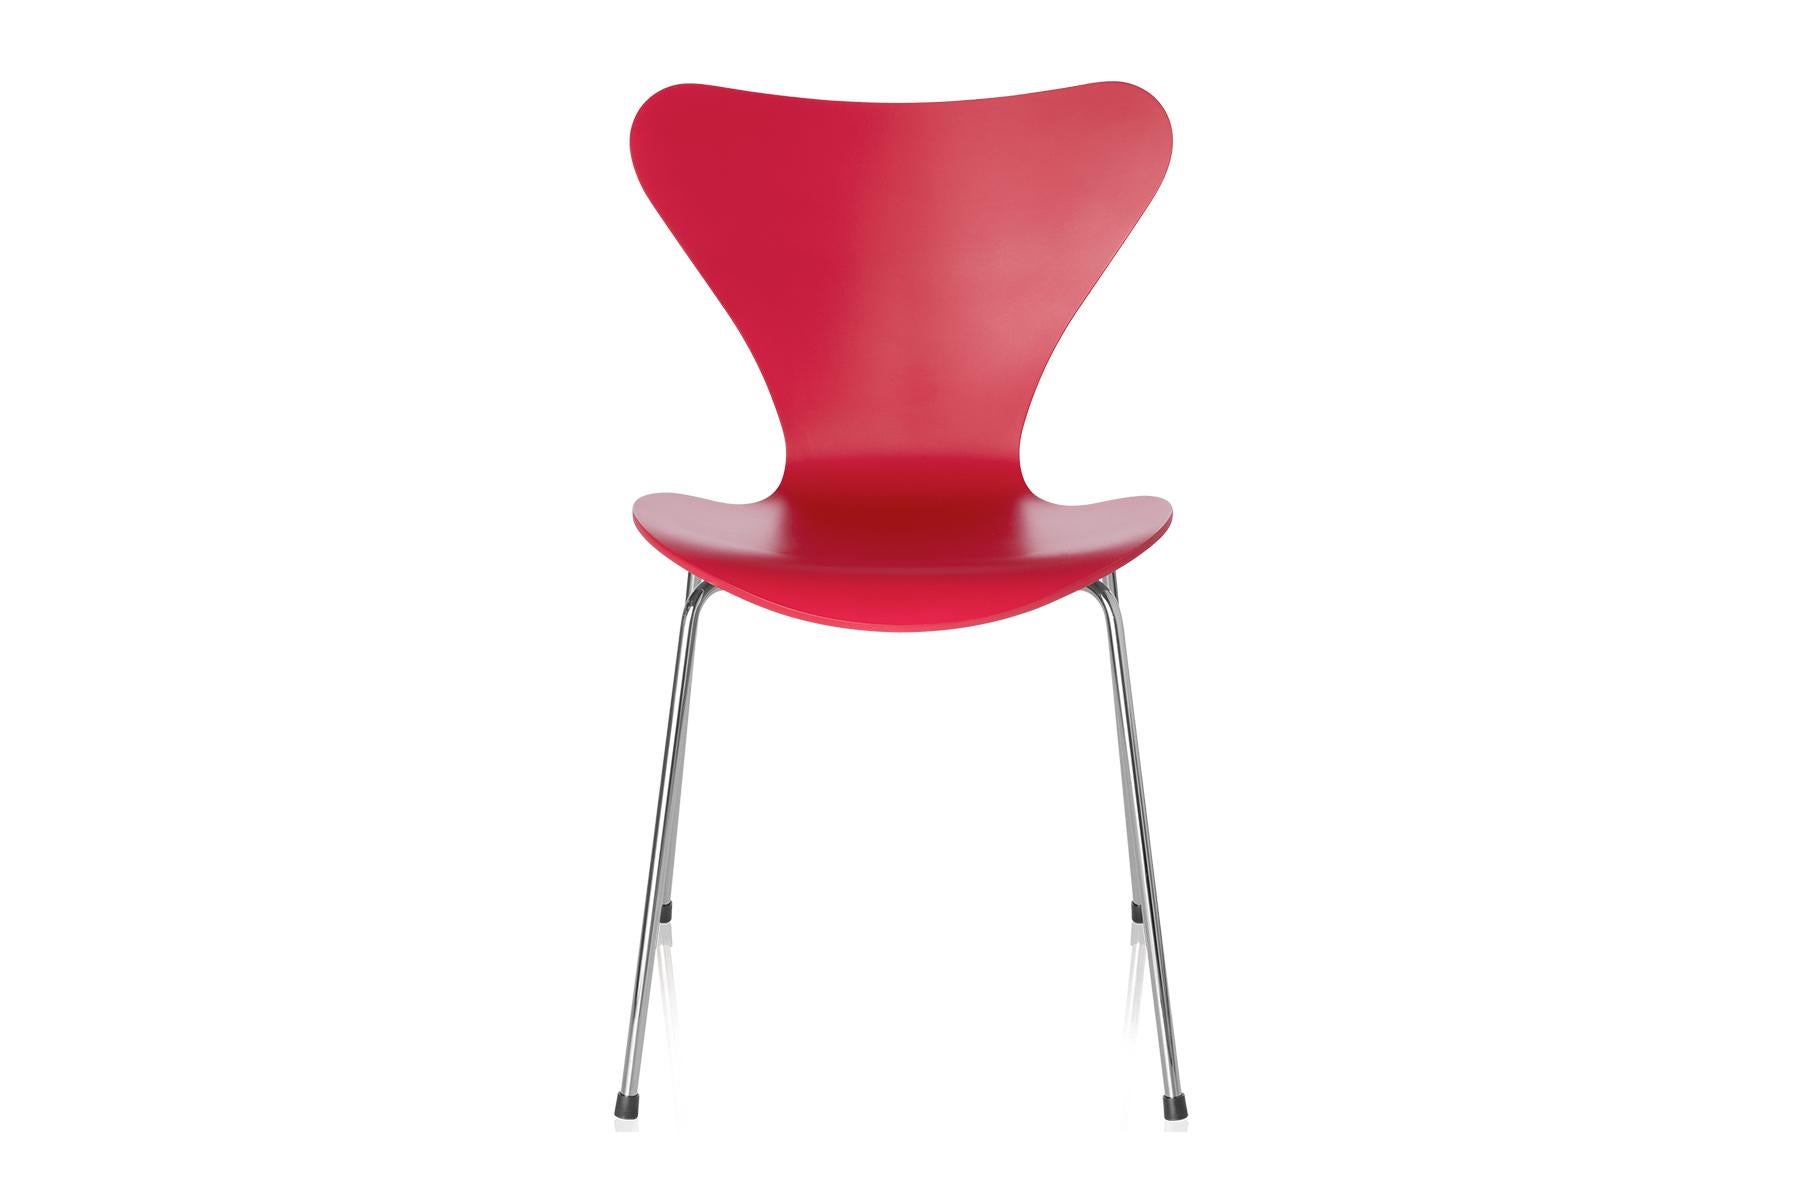 American Arne Jacobsen Model 3201 Fully Lacquered For Sale